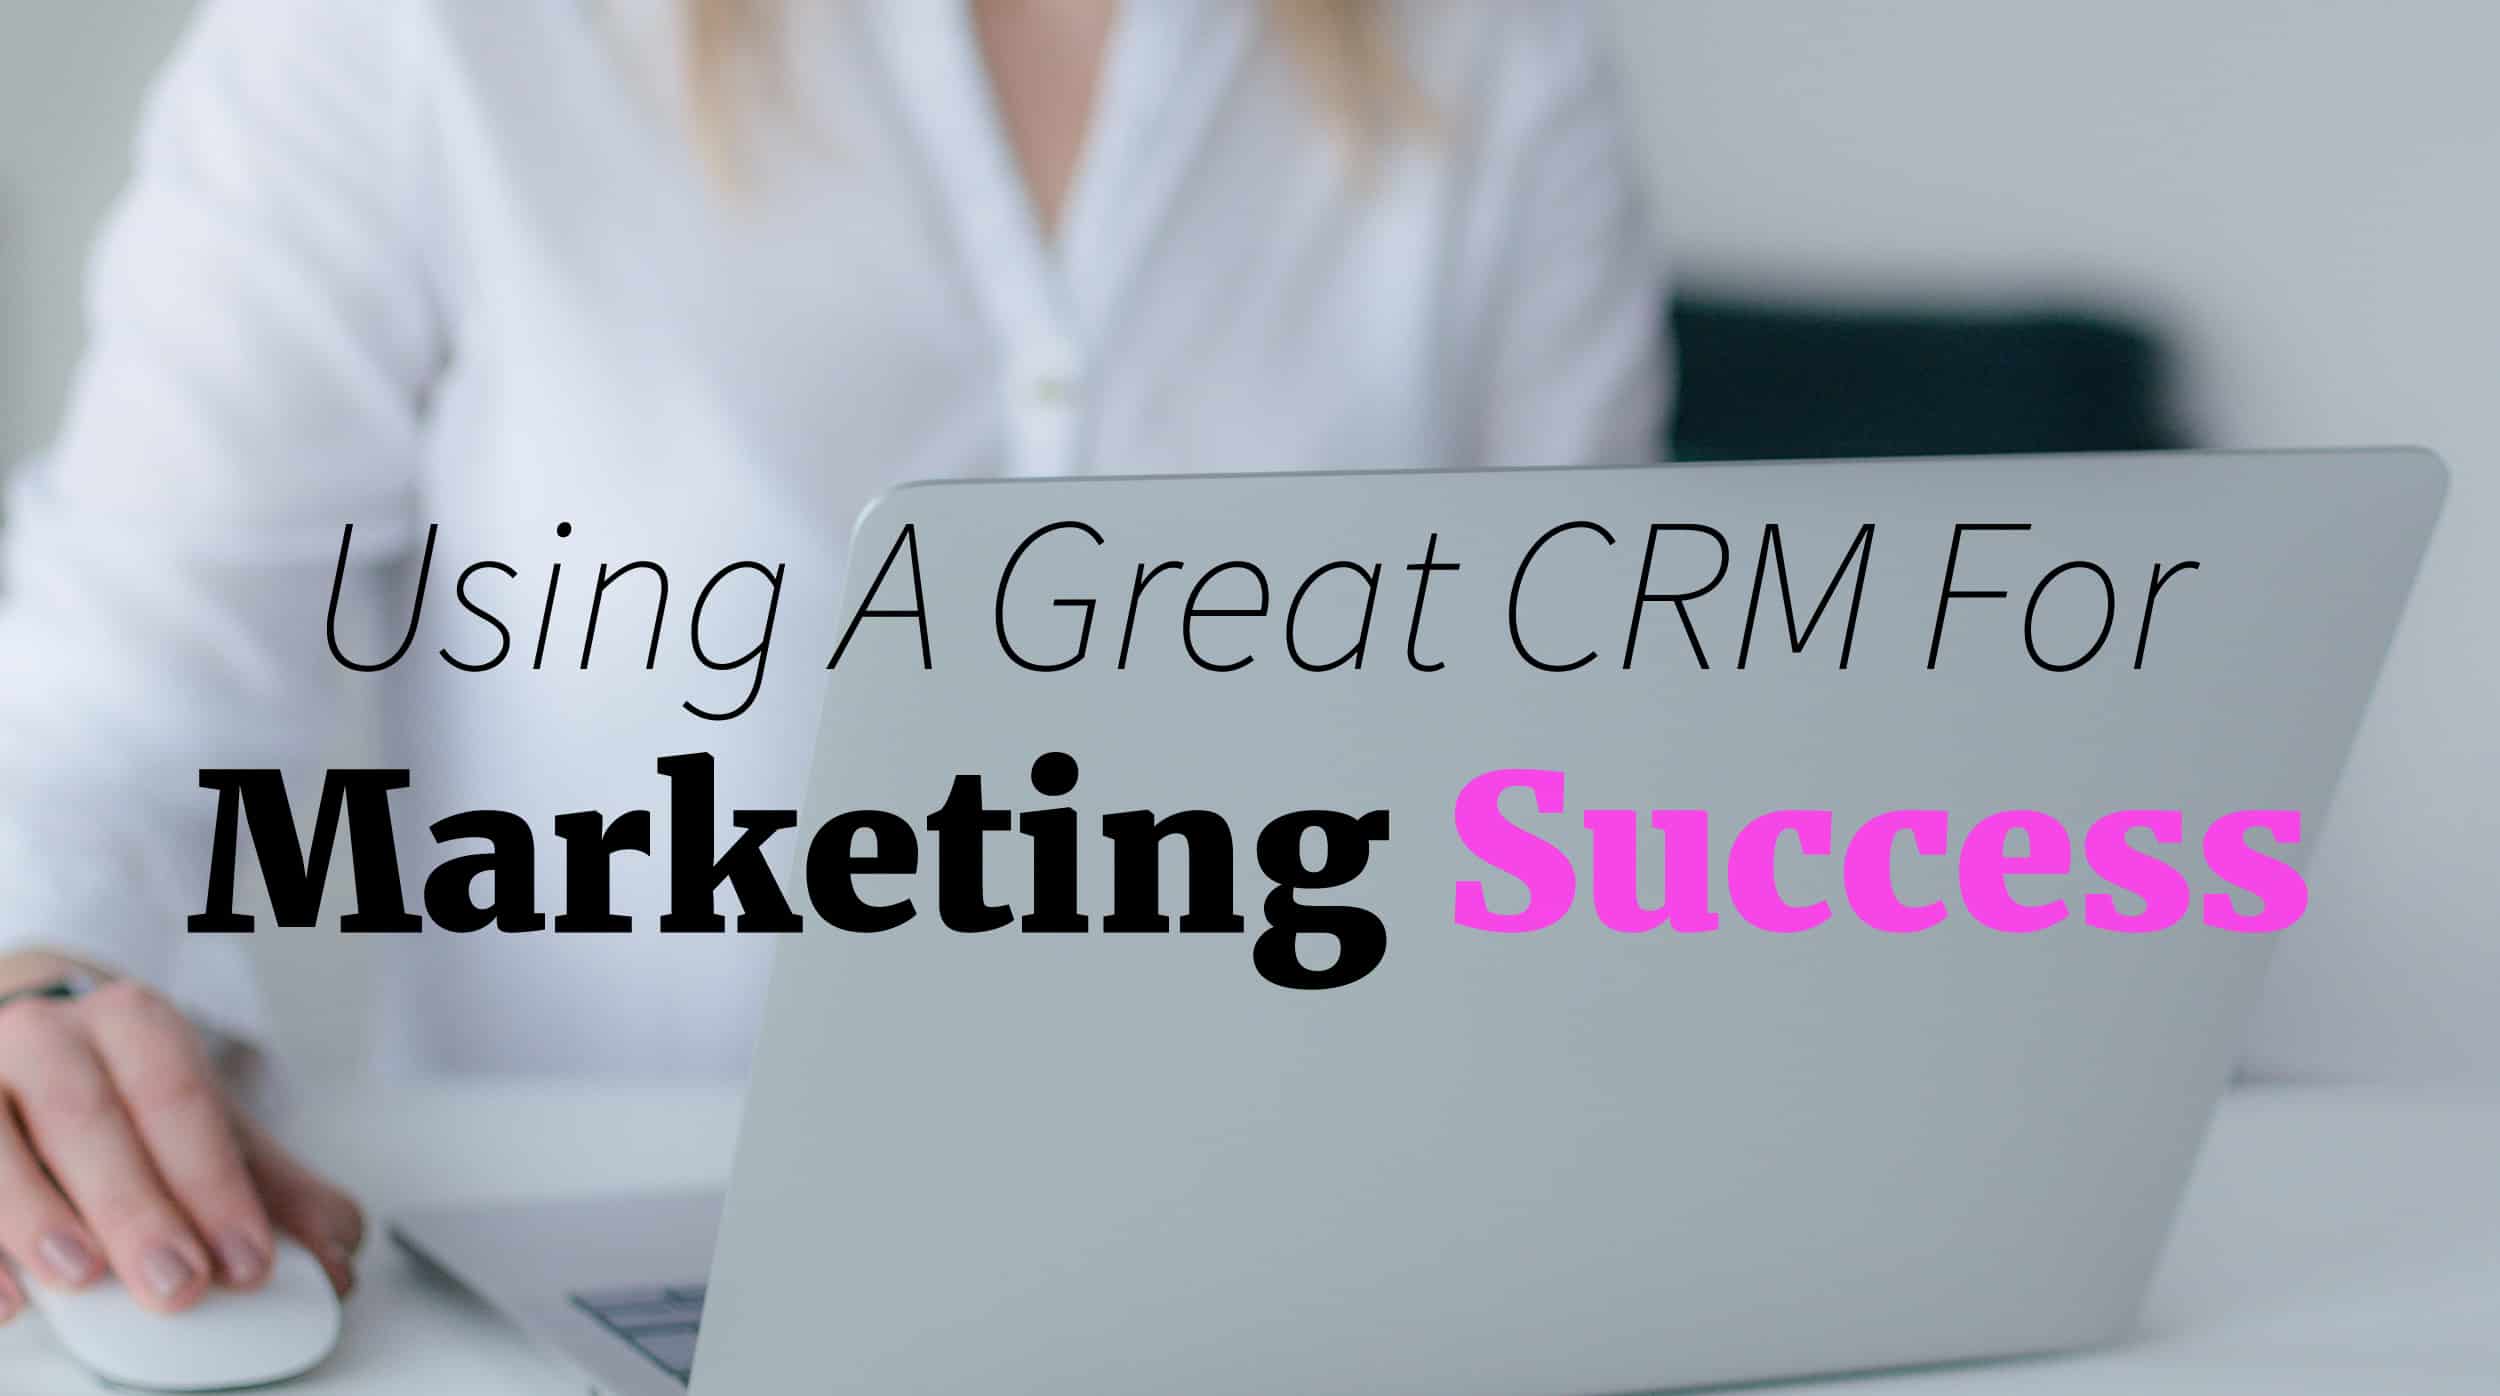 CRMs for Marketing Success